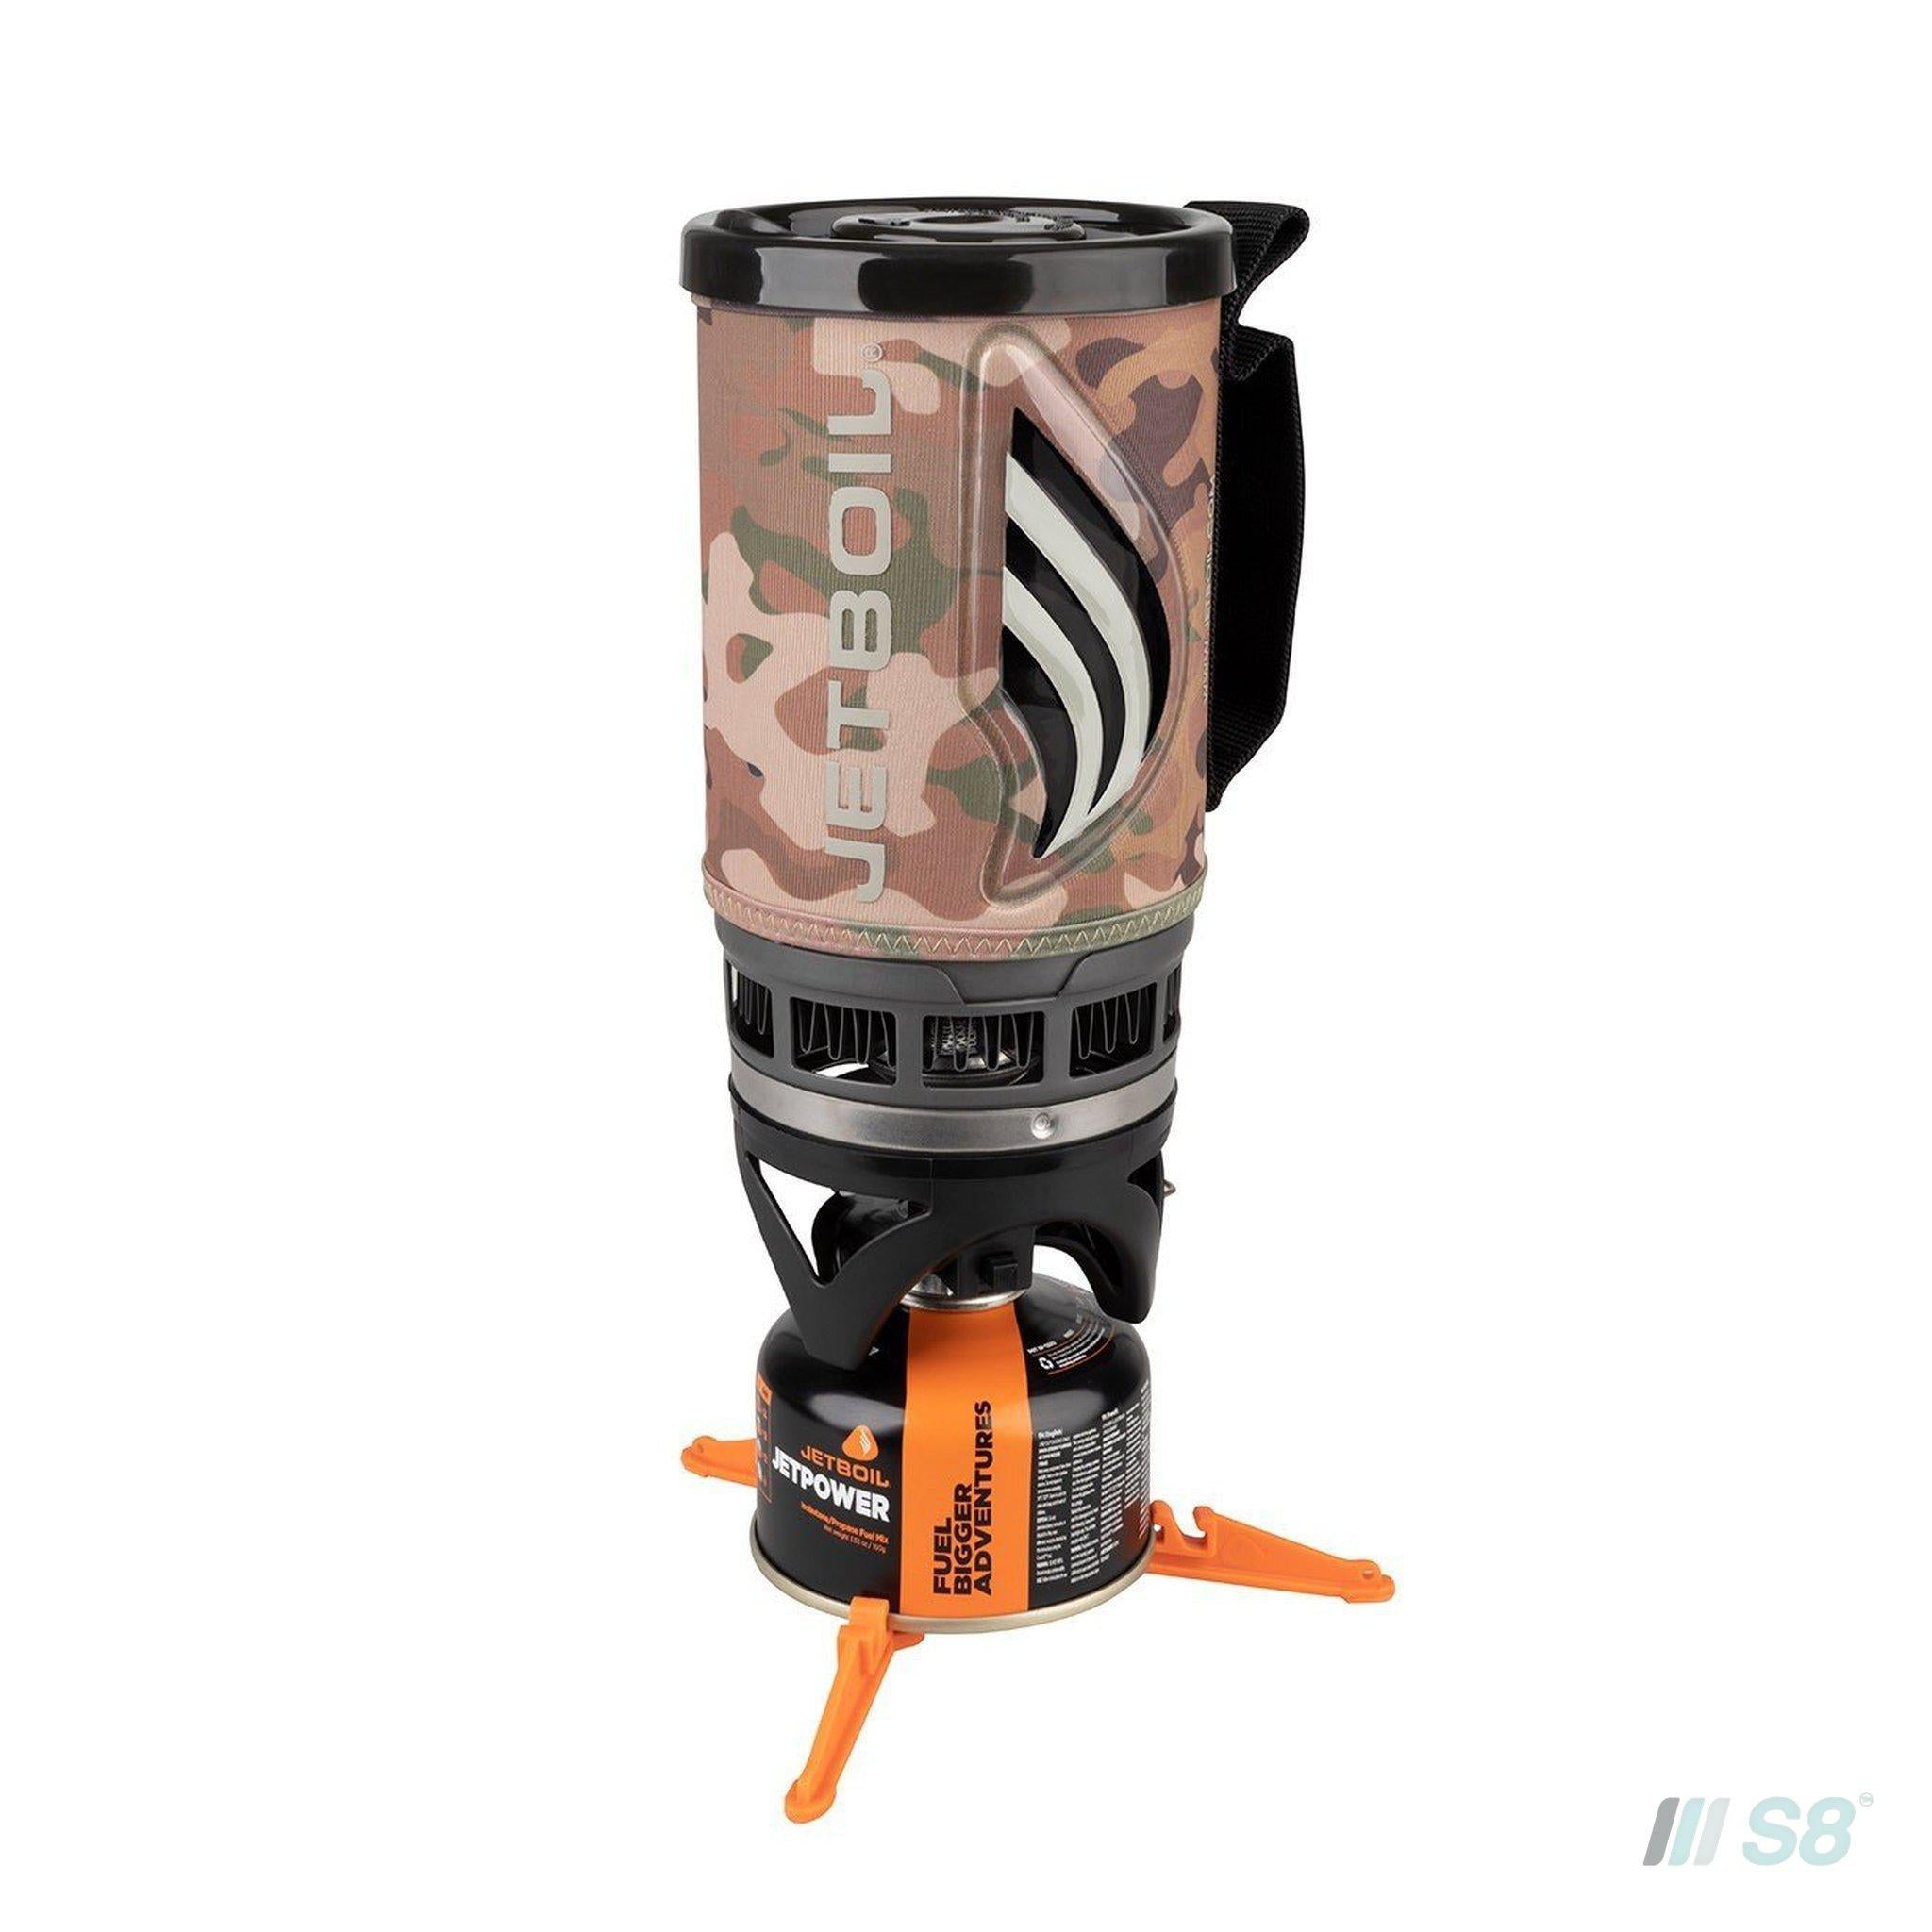 JETBOIL Flash Personal Cooking System-jetboil-S8 Products Group